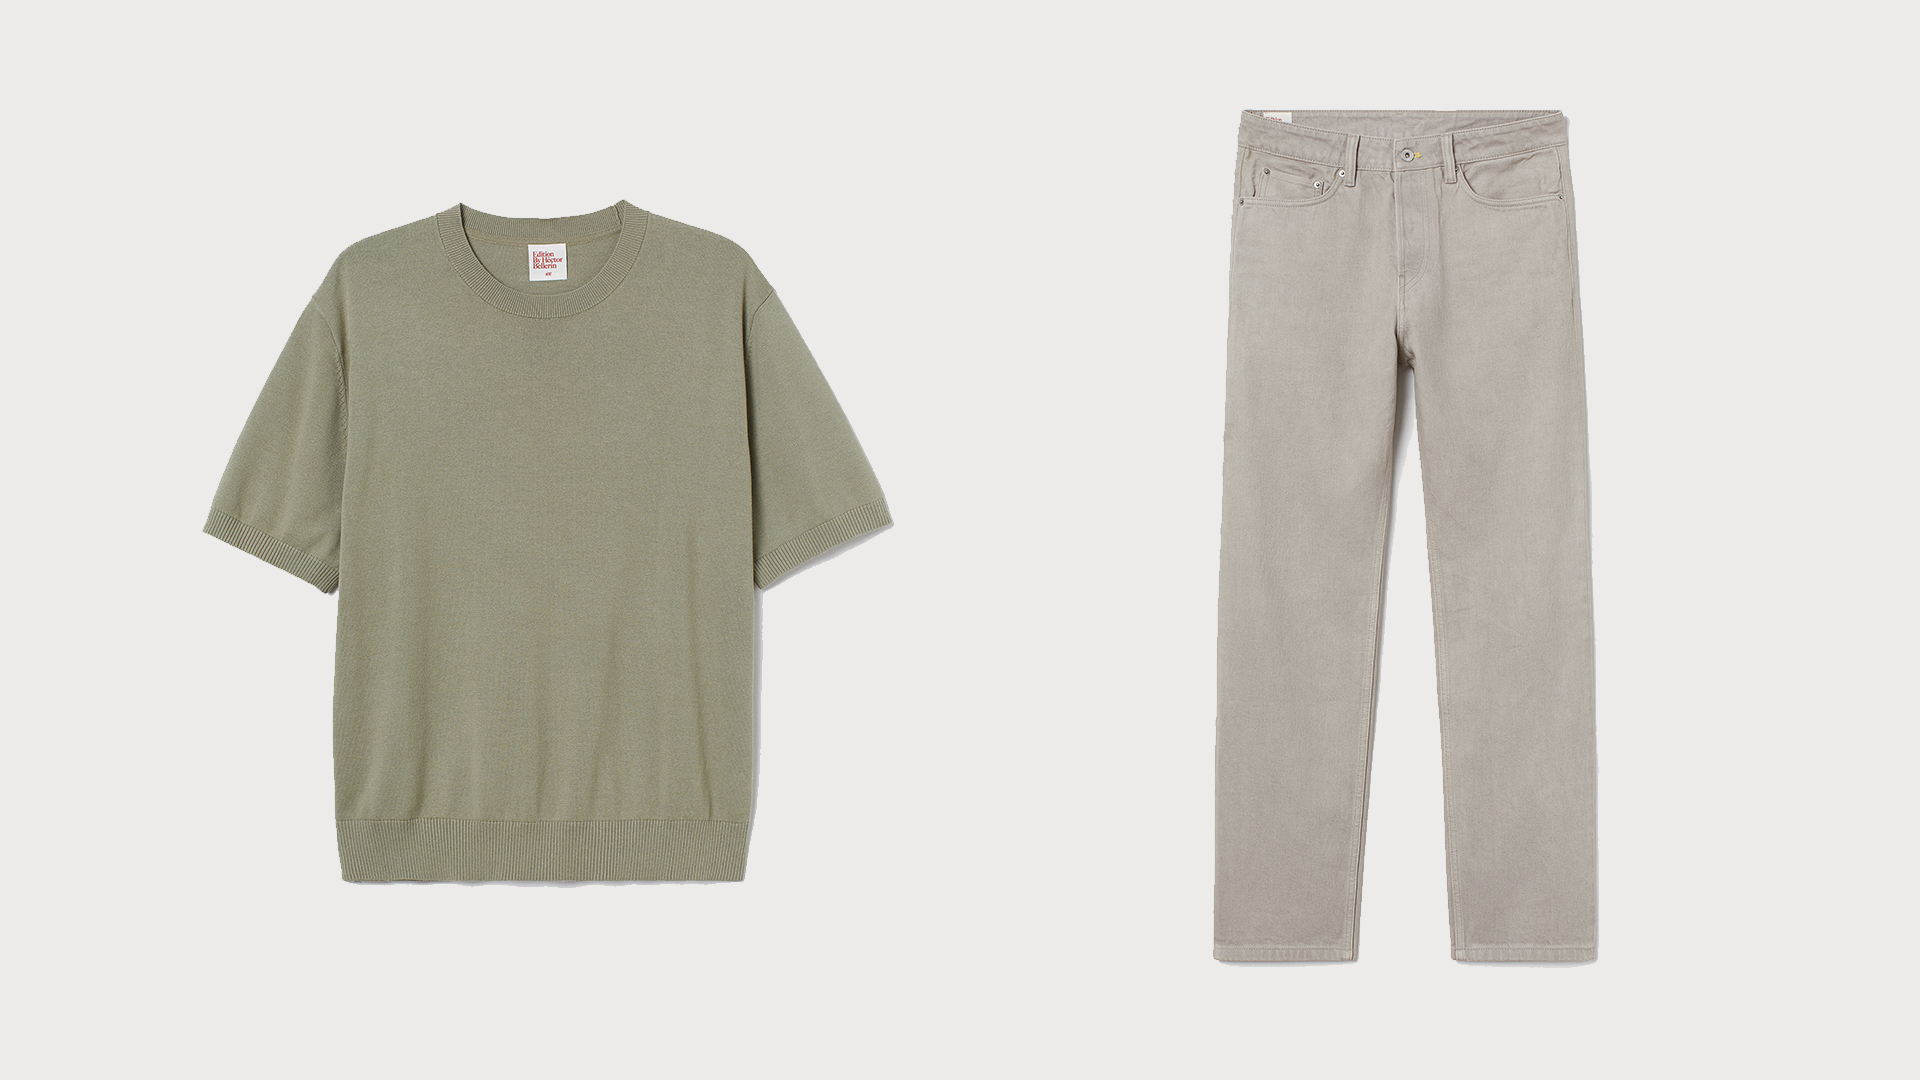 Outfits I Put Together From The Hector Bellerin Capsule Collection